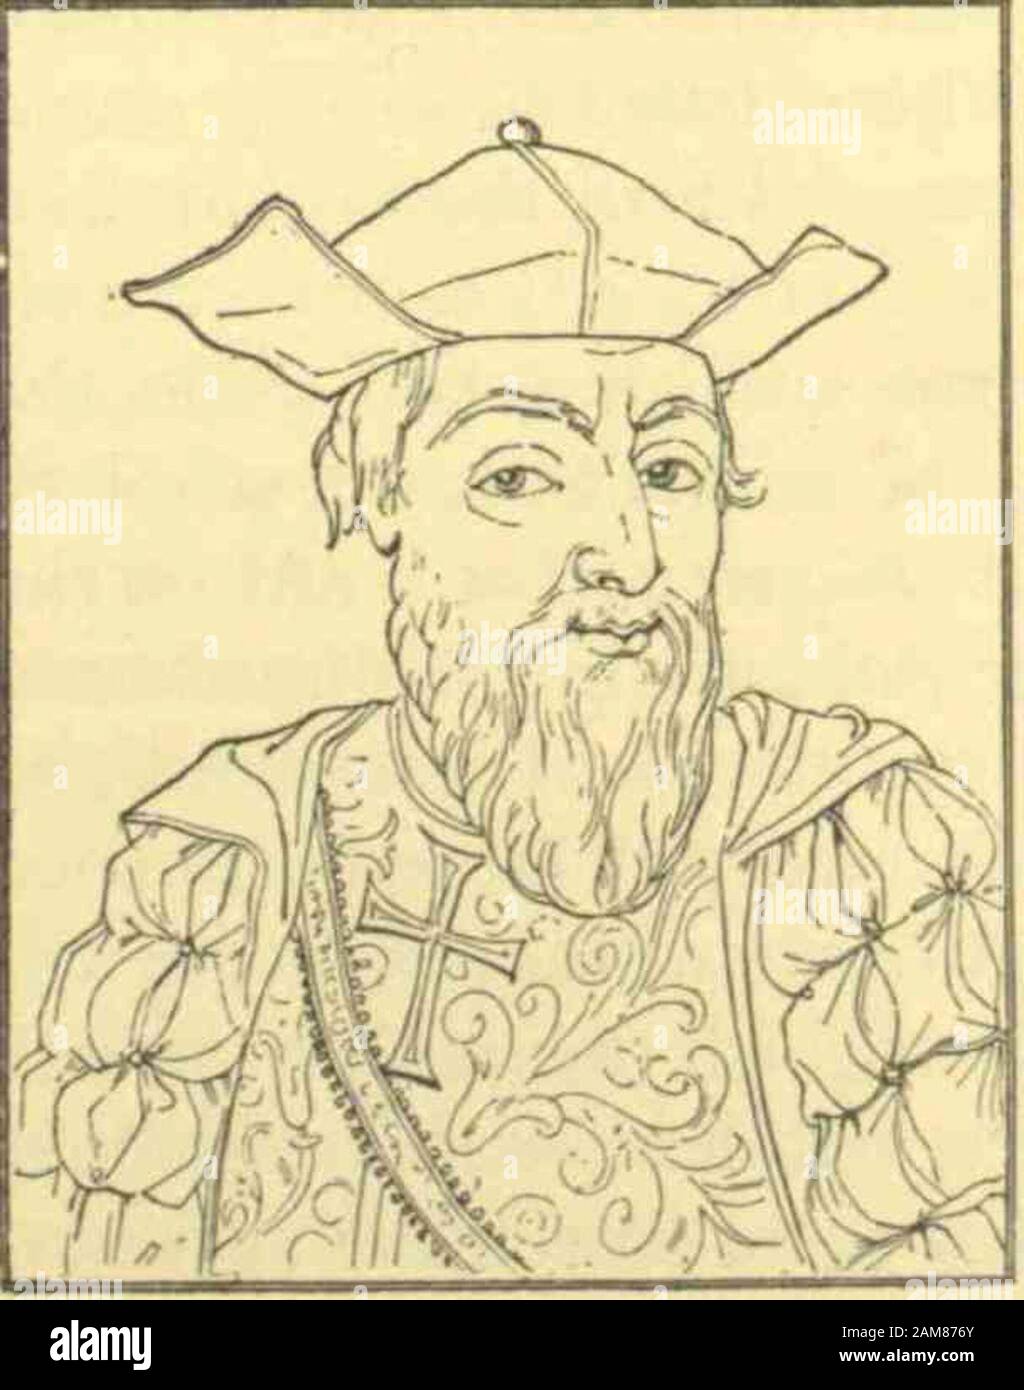 Great men and famous women : a series of pen and pencil sketches of the lives of more than 200 of the most prominent personages in history Volume 5 . VASCO DA GAMA* By Judge Albion W. Tourg£e(146(^1525). v Asco DA Gama was the pet of fortune. Neverdid a man win immortality more easily. Asa discoverer and a navigator he should rank notonly below Columbus, but also below BartolemeoDiaz and Cabral among his own countrymen, aswell as Vespucius and Magellan, who carried theSpanish flag, and the Cabots, who established Eng-lands claim to the most important portions of theNew World. As a commander, a Stock Photo